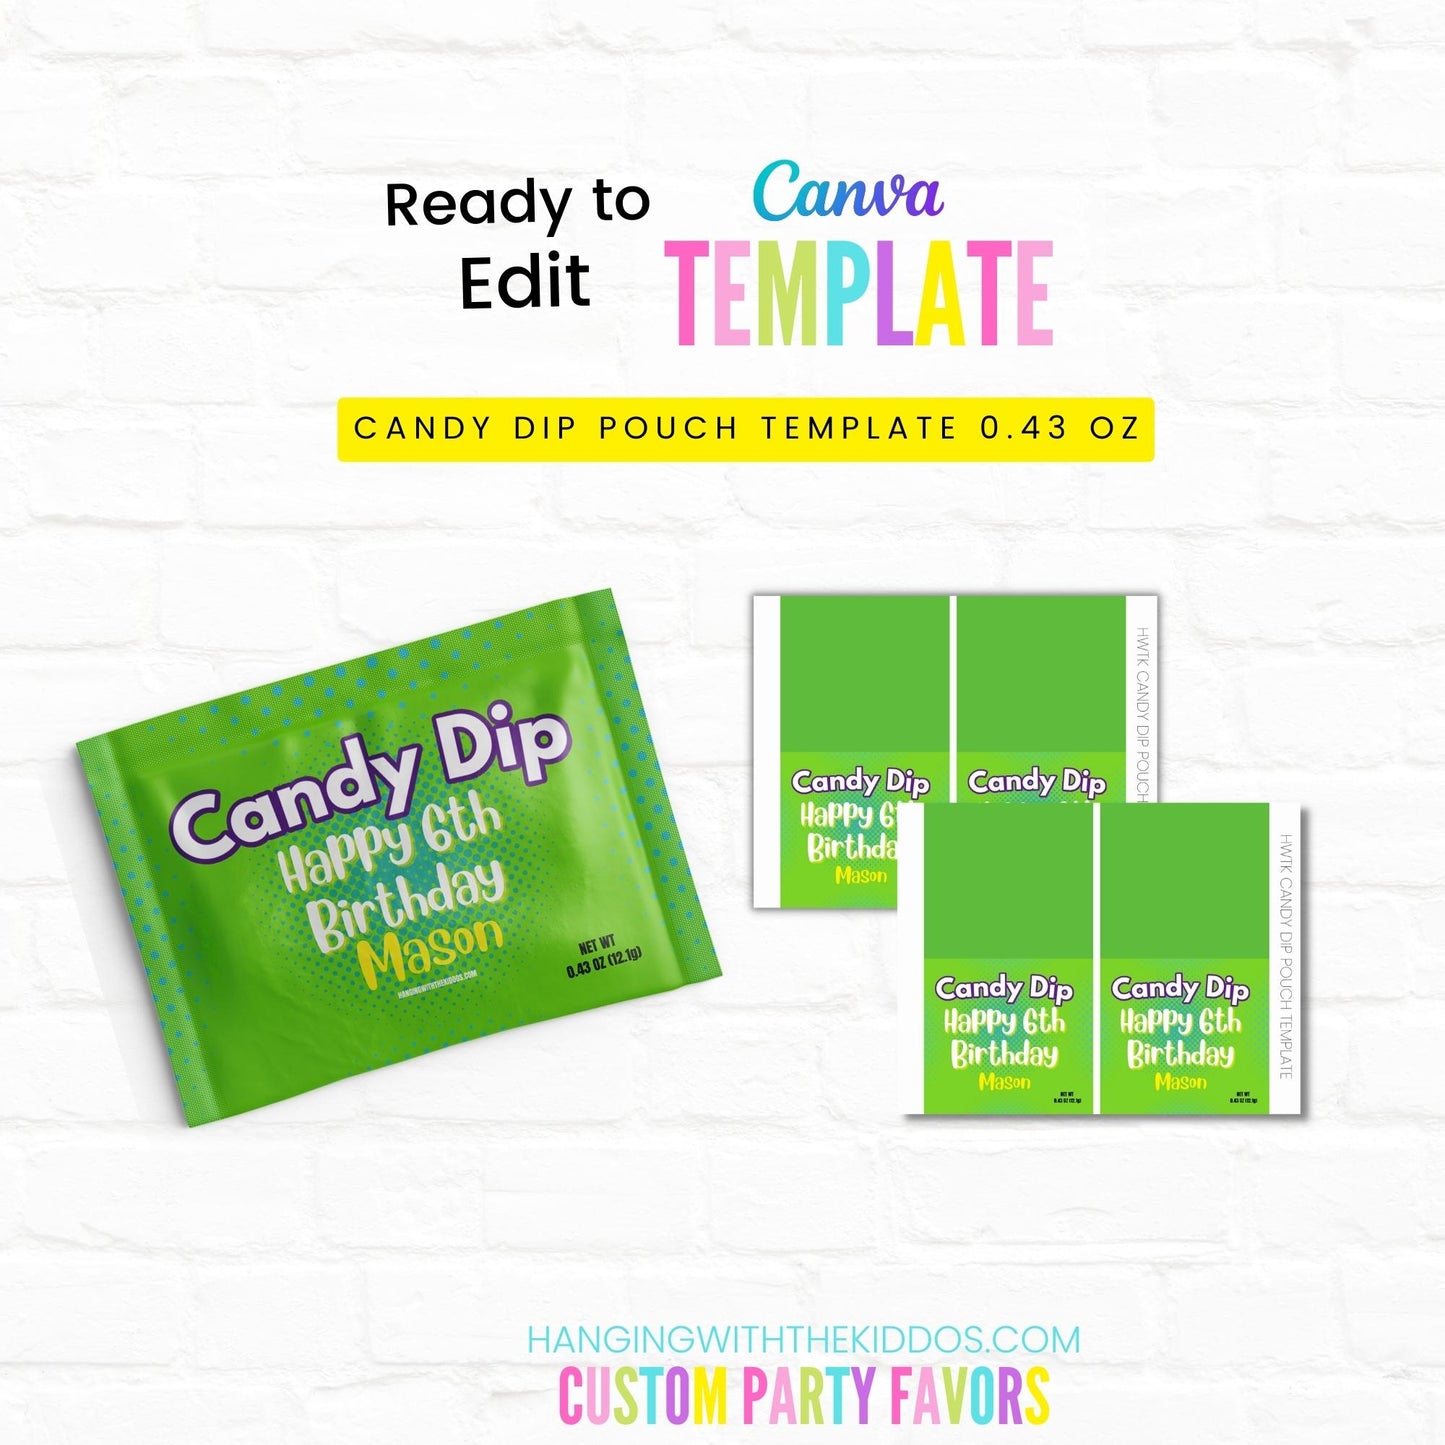 CANDY DIP POUCH TEMPLATE